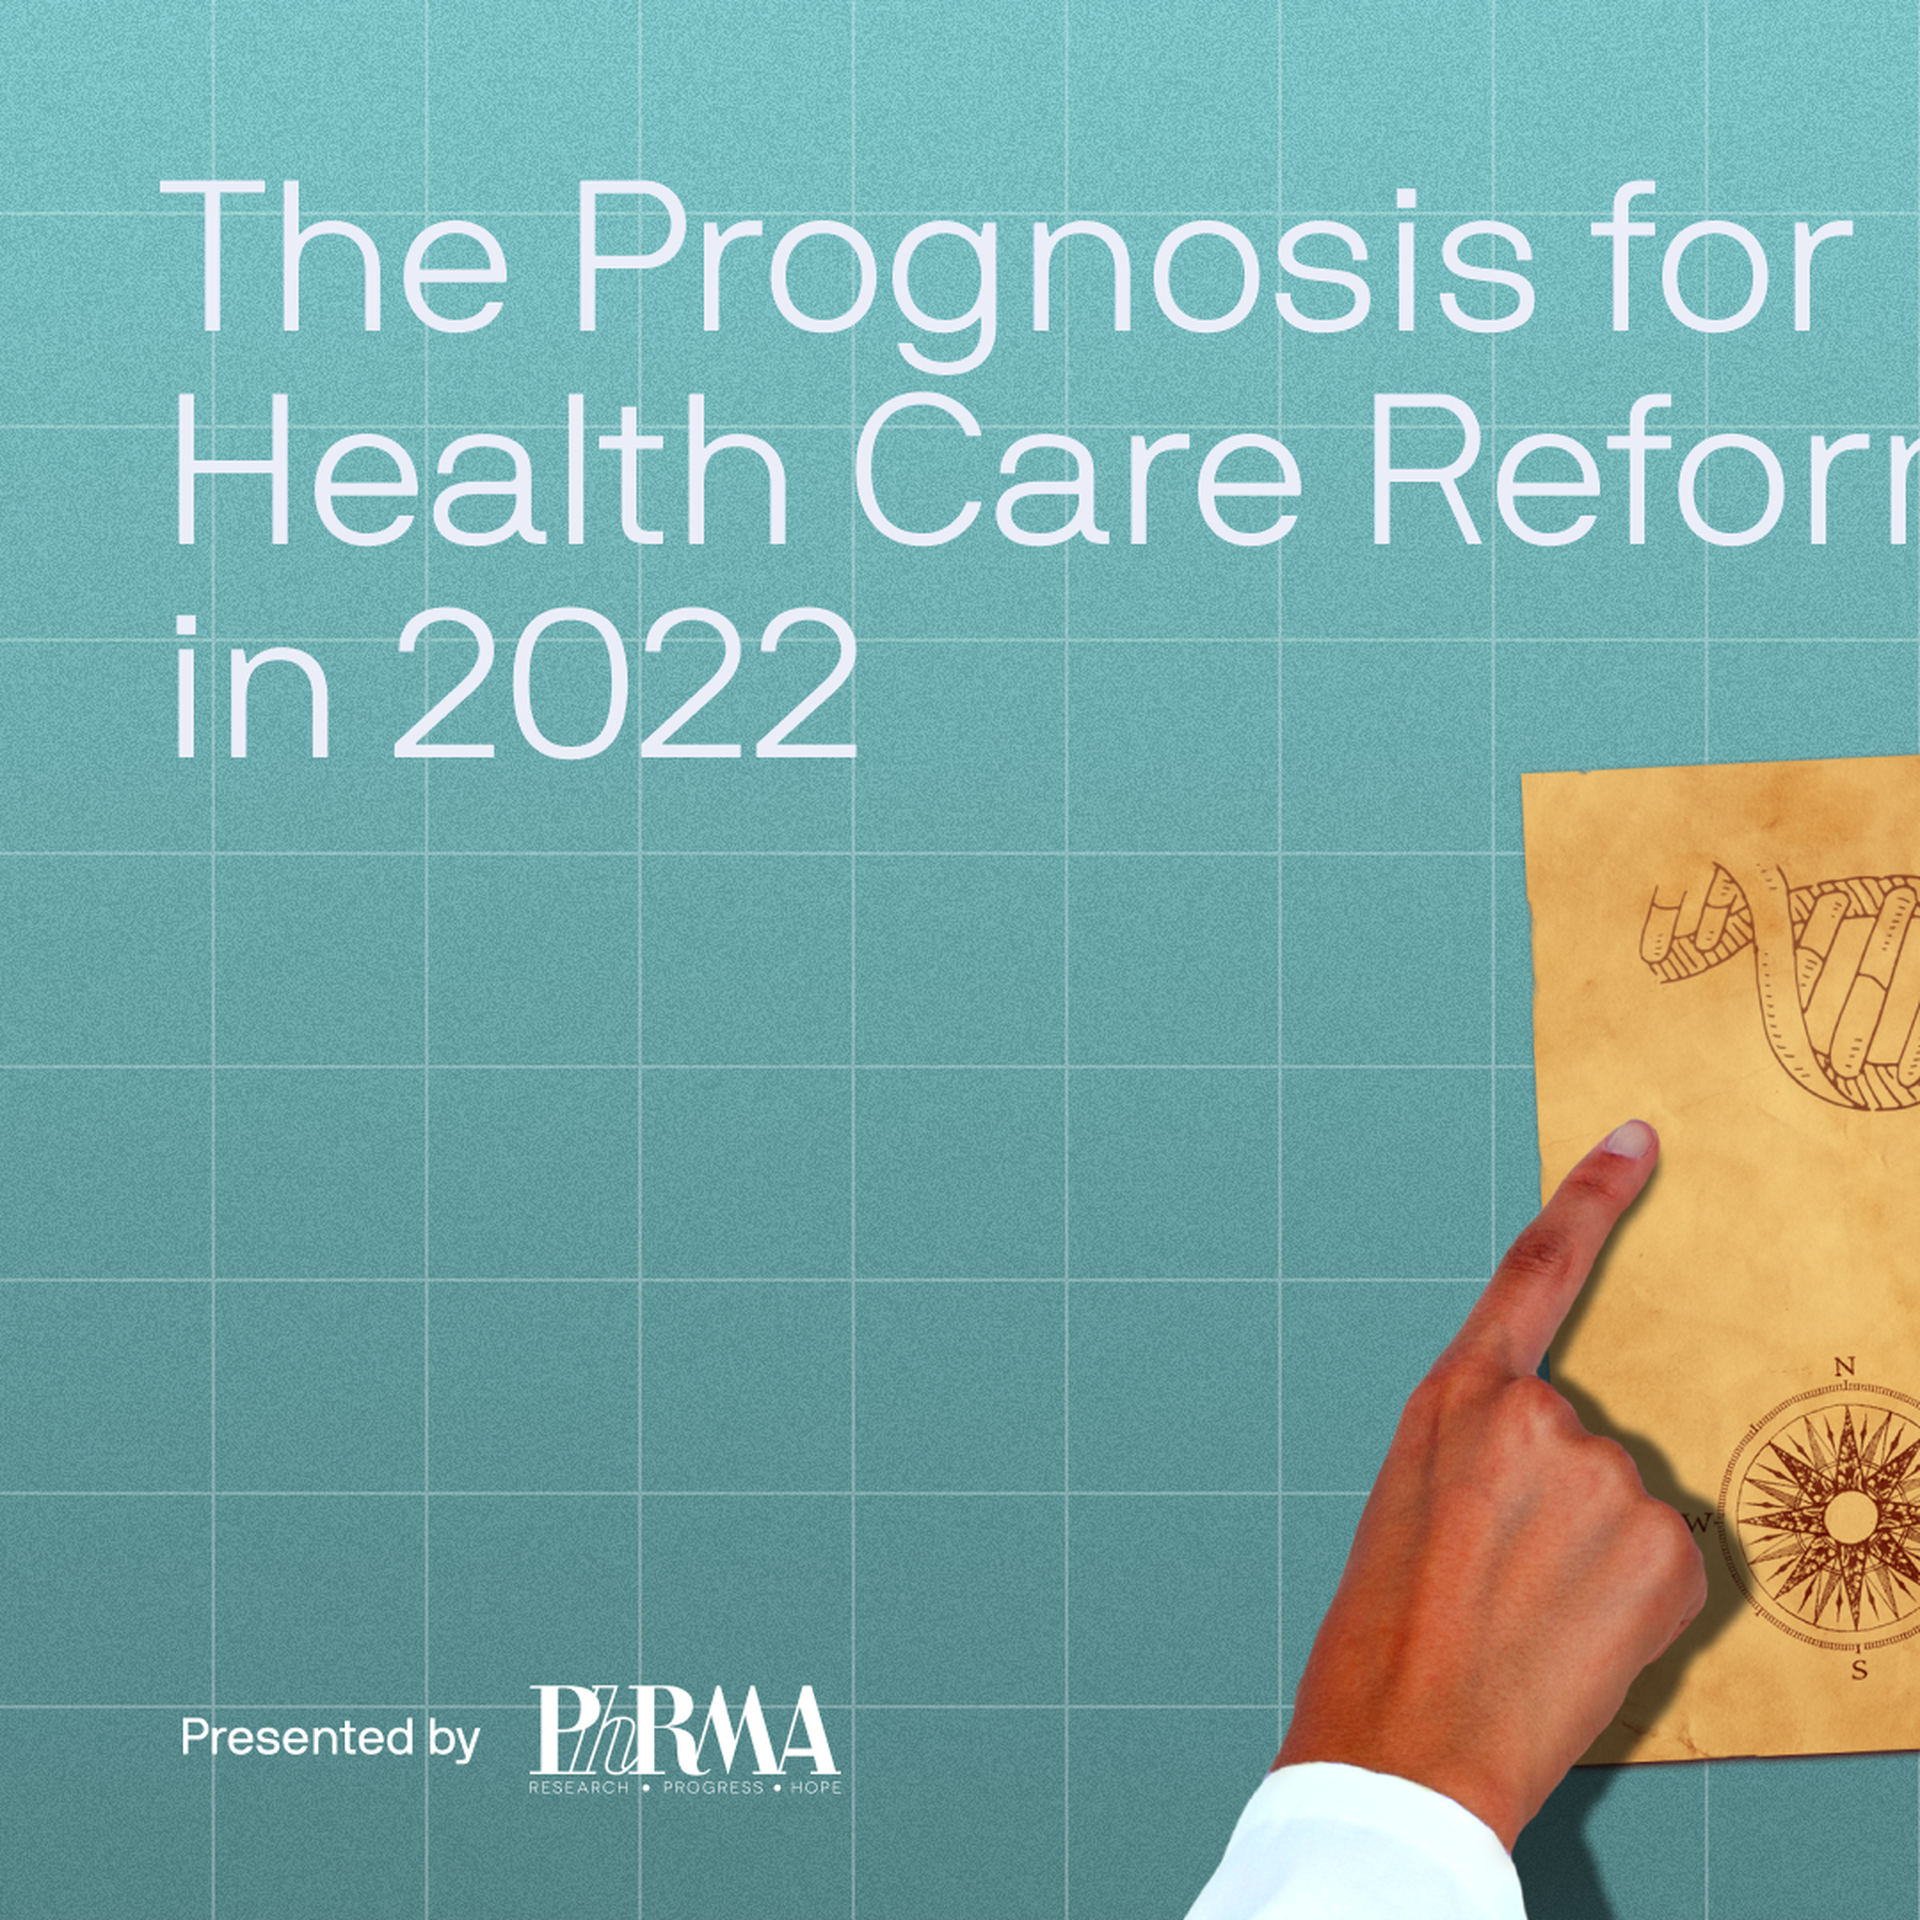 The Prognosis for Health Care Reform in 2022